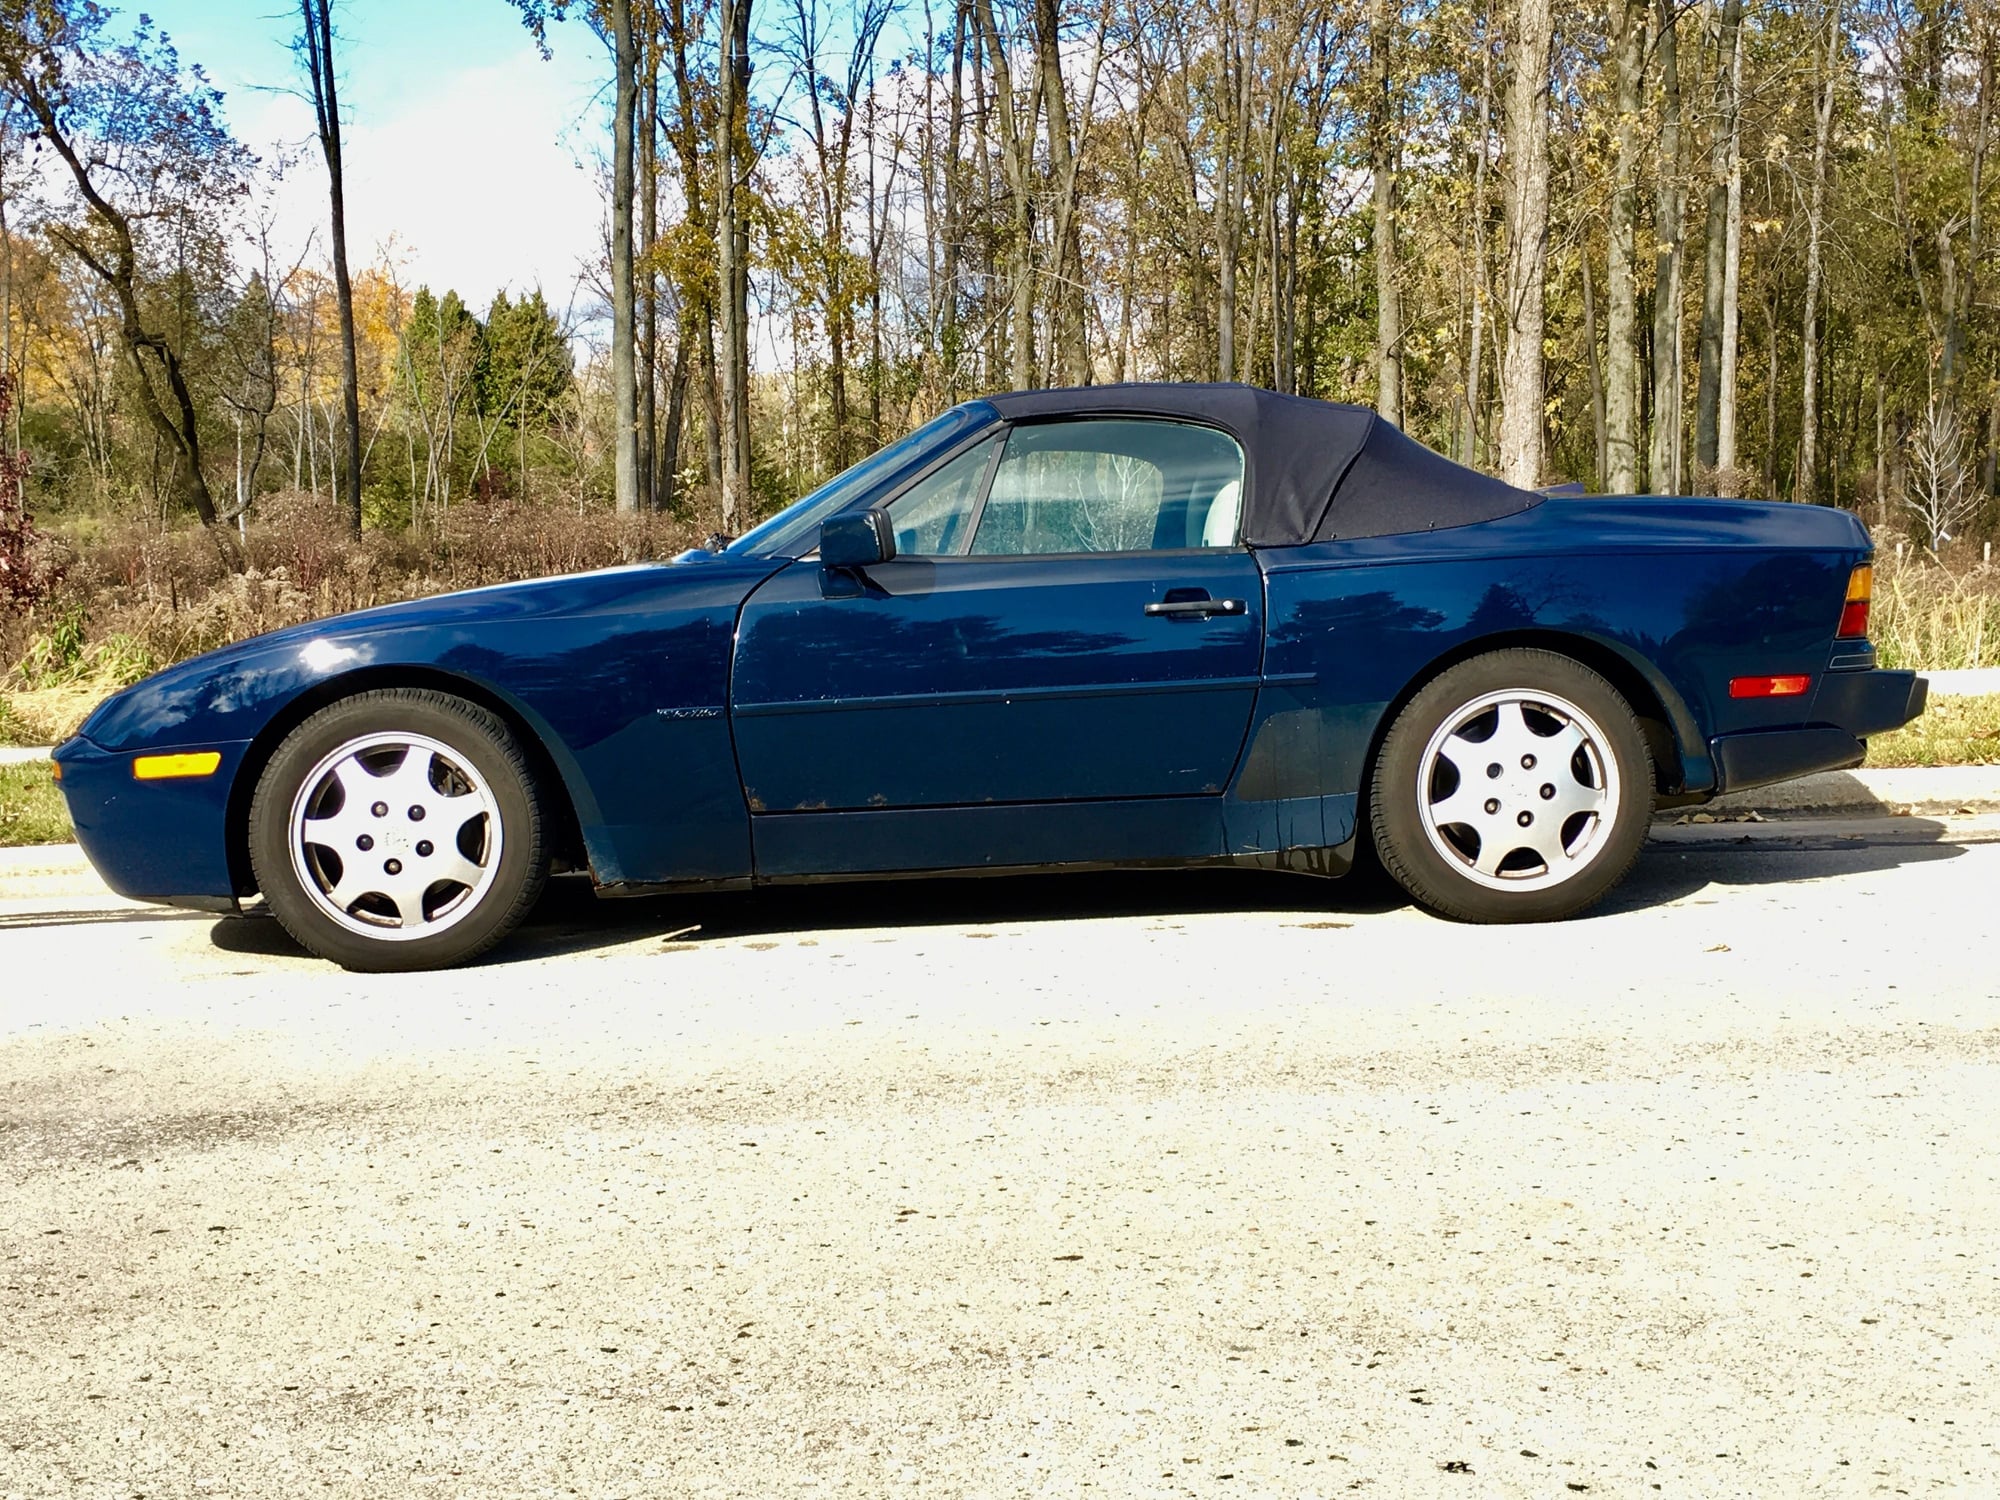 1990 Porsche 944 - Beautiful Blue 1990 944 S Cabriolet - Used - VIN WP0CB2945LN481623 - 150,523 Miles - 4 cyl - 2WD - Manual - Convertible - Blue - Milwaukee, WI 53217, United States